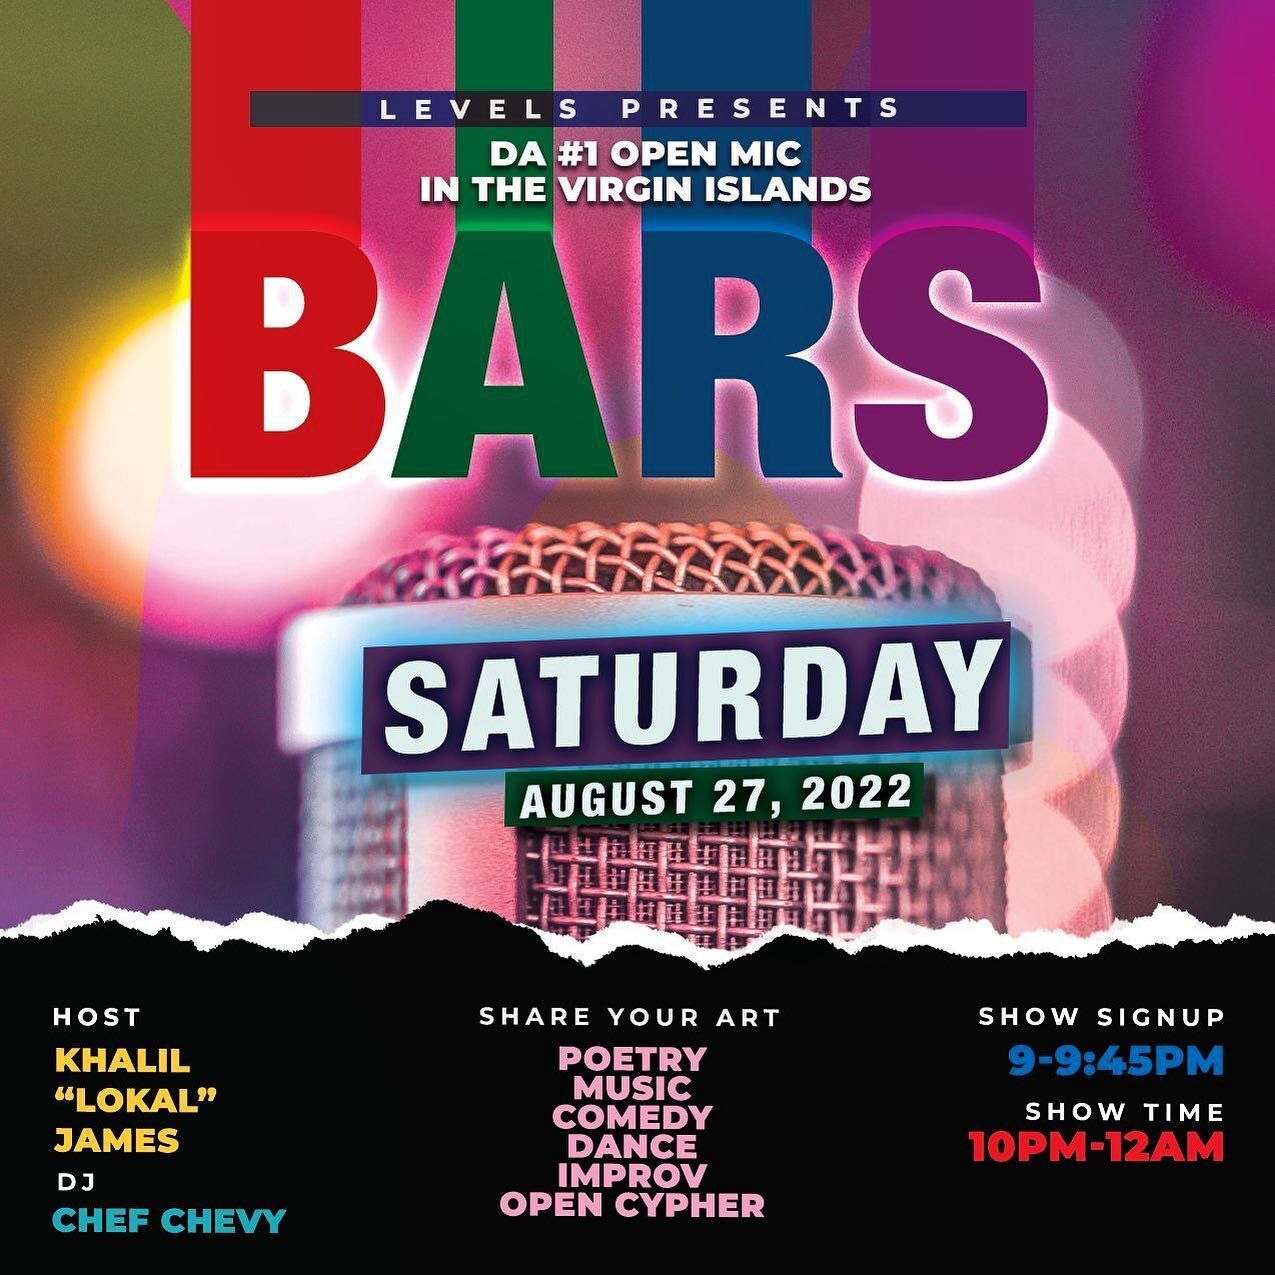 You got BARS? Saturday Aug 27 come share your poetry, music, comedy, dance, improv or whatever else you got! Sign up starts at 9pm, show starts at 10pm. This is a safe space to share and enjoy &mdash; we can&rsquo;t wait to see your art! 🎶🎤🎧